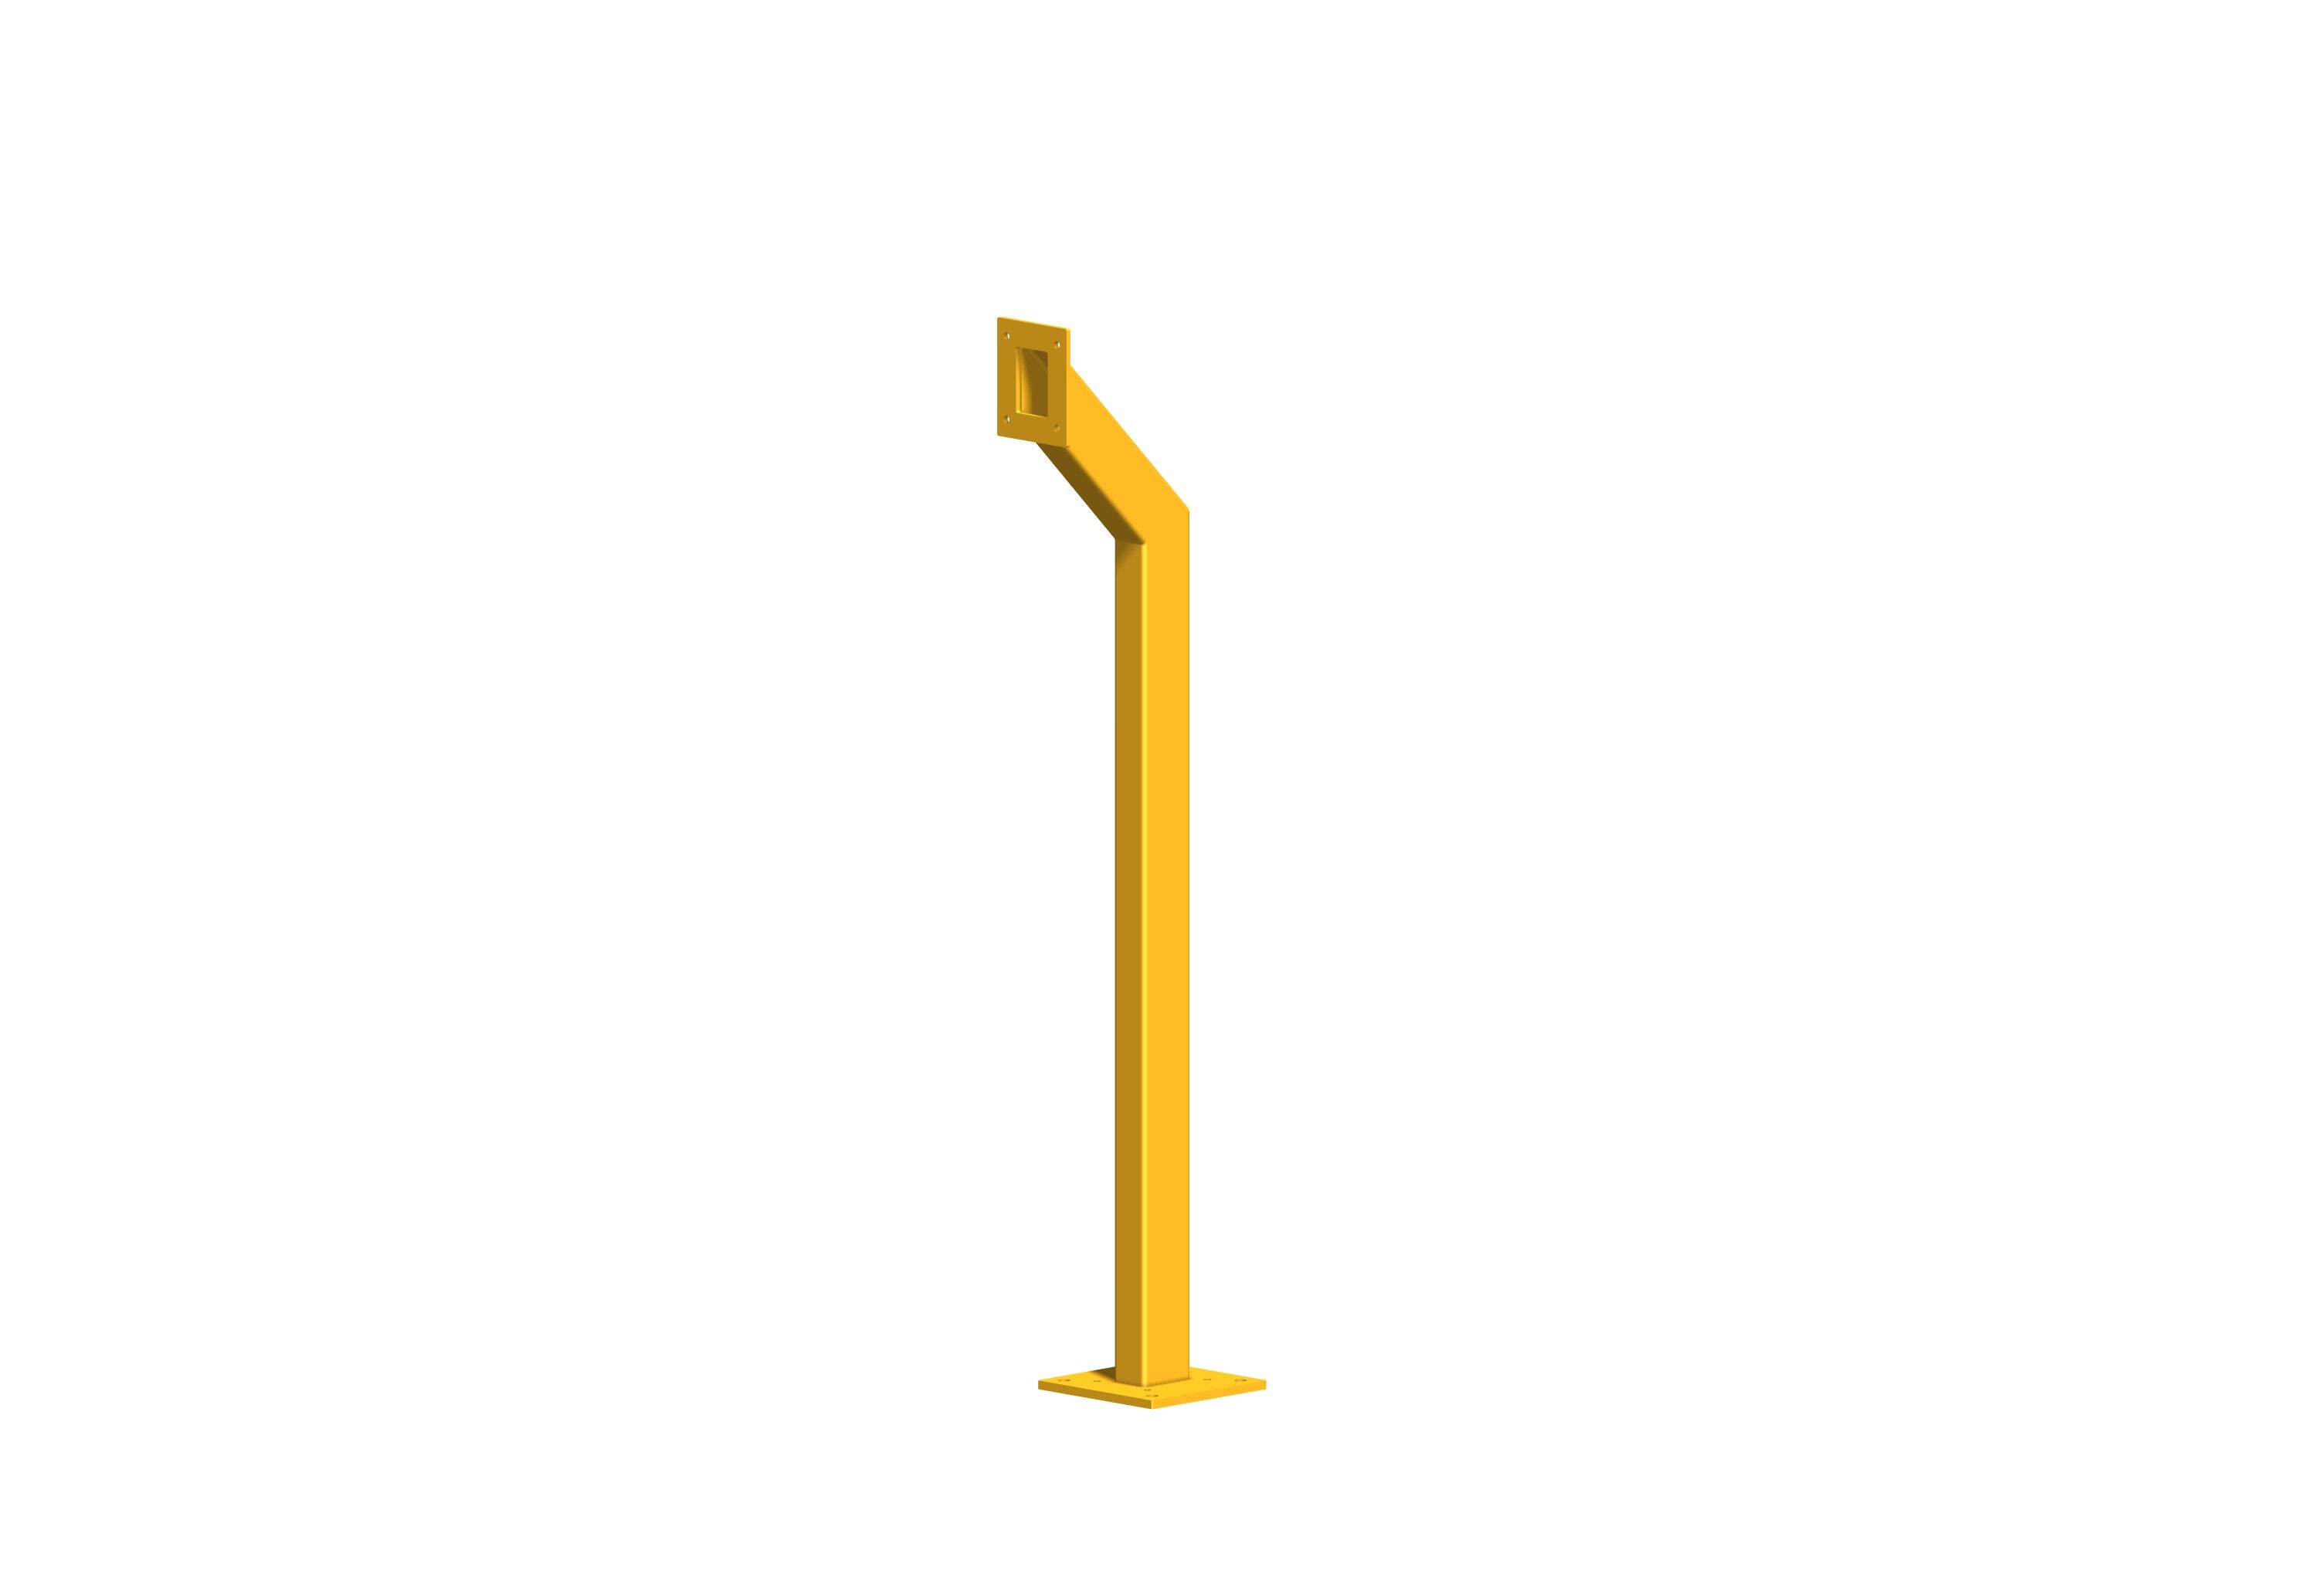 SER1Y SINGLE BOLLARD ANGLE NECK YELLOW 75MM X 50MM X 1170MM HIGH (Contact us for Shipping details)